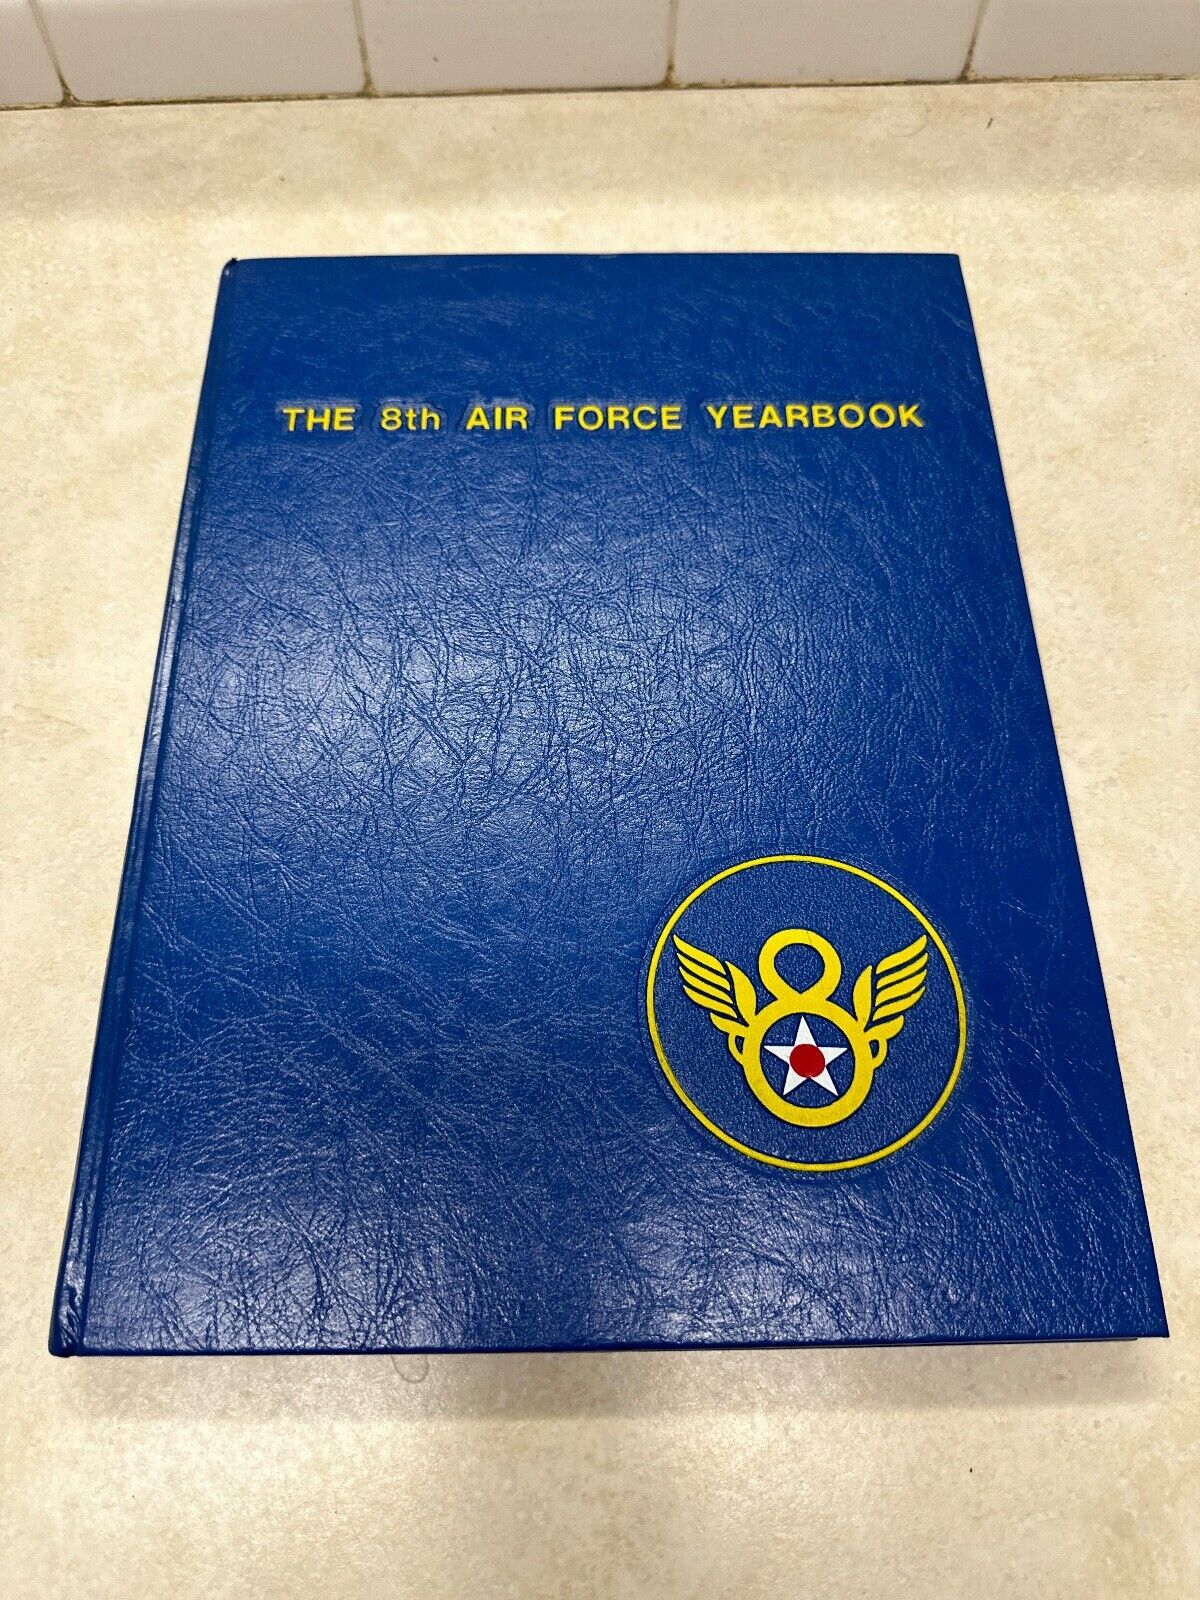 The 8th Air Force Yearbook by J. H.  Woolnough c, 1981